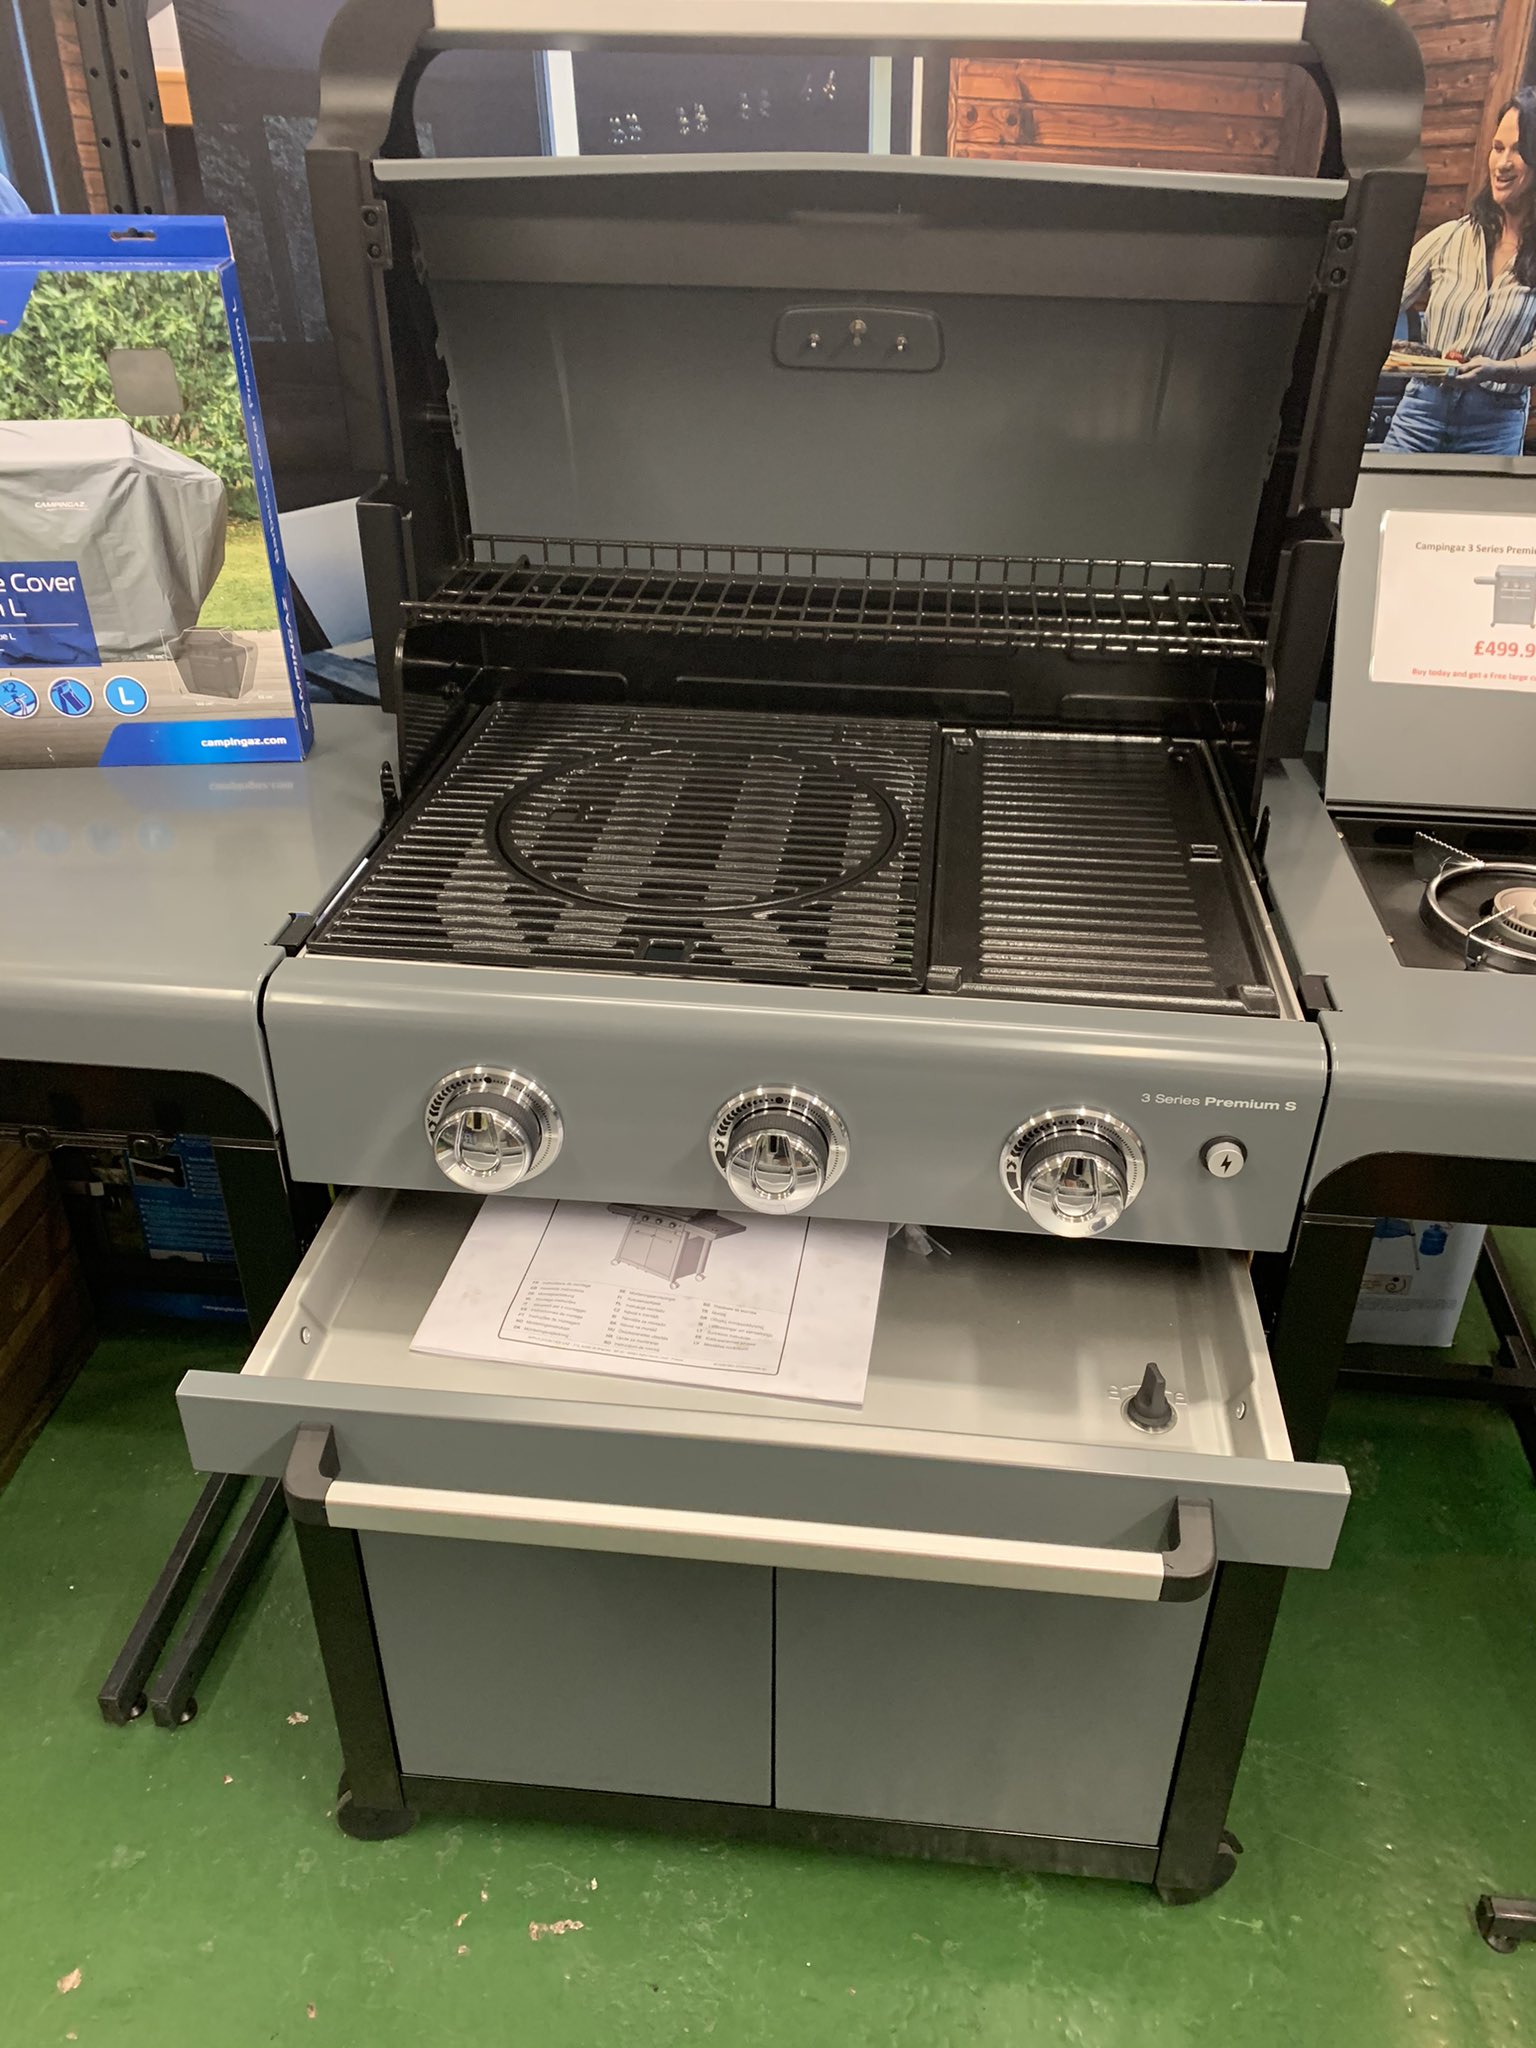 uitslag Vaderlijk verjaardag BCH Camping on Twitter: "Campingaz 3 Series Premium S Grey Gas BBQ £499.99!  Now on display and in stock from our Trowbridge store! Or visit our website:  https://t.co/i1khmvbVSo #BBQ #holiday #bchcamping #bch #